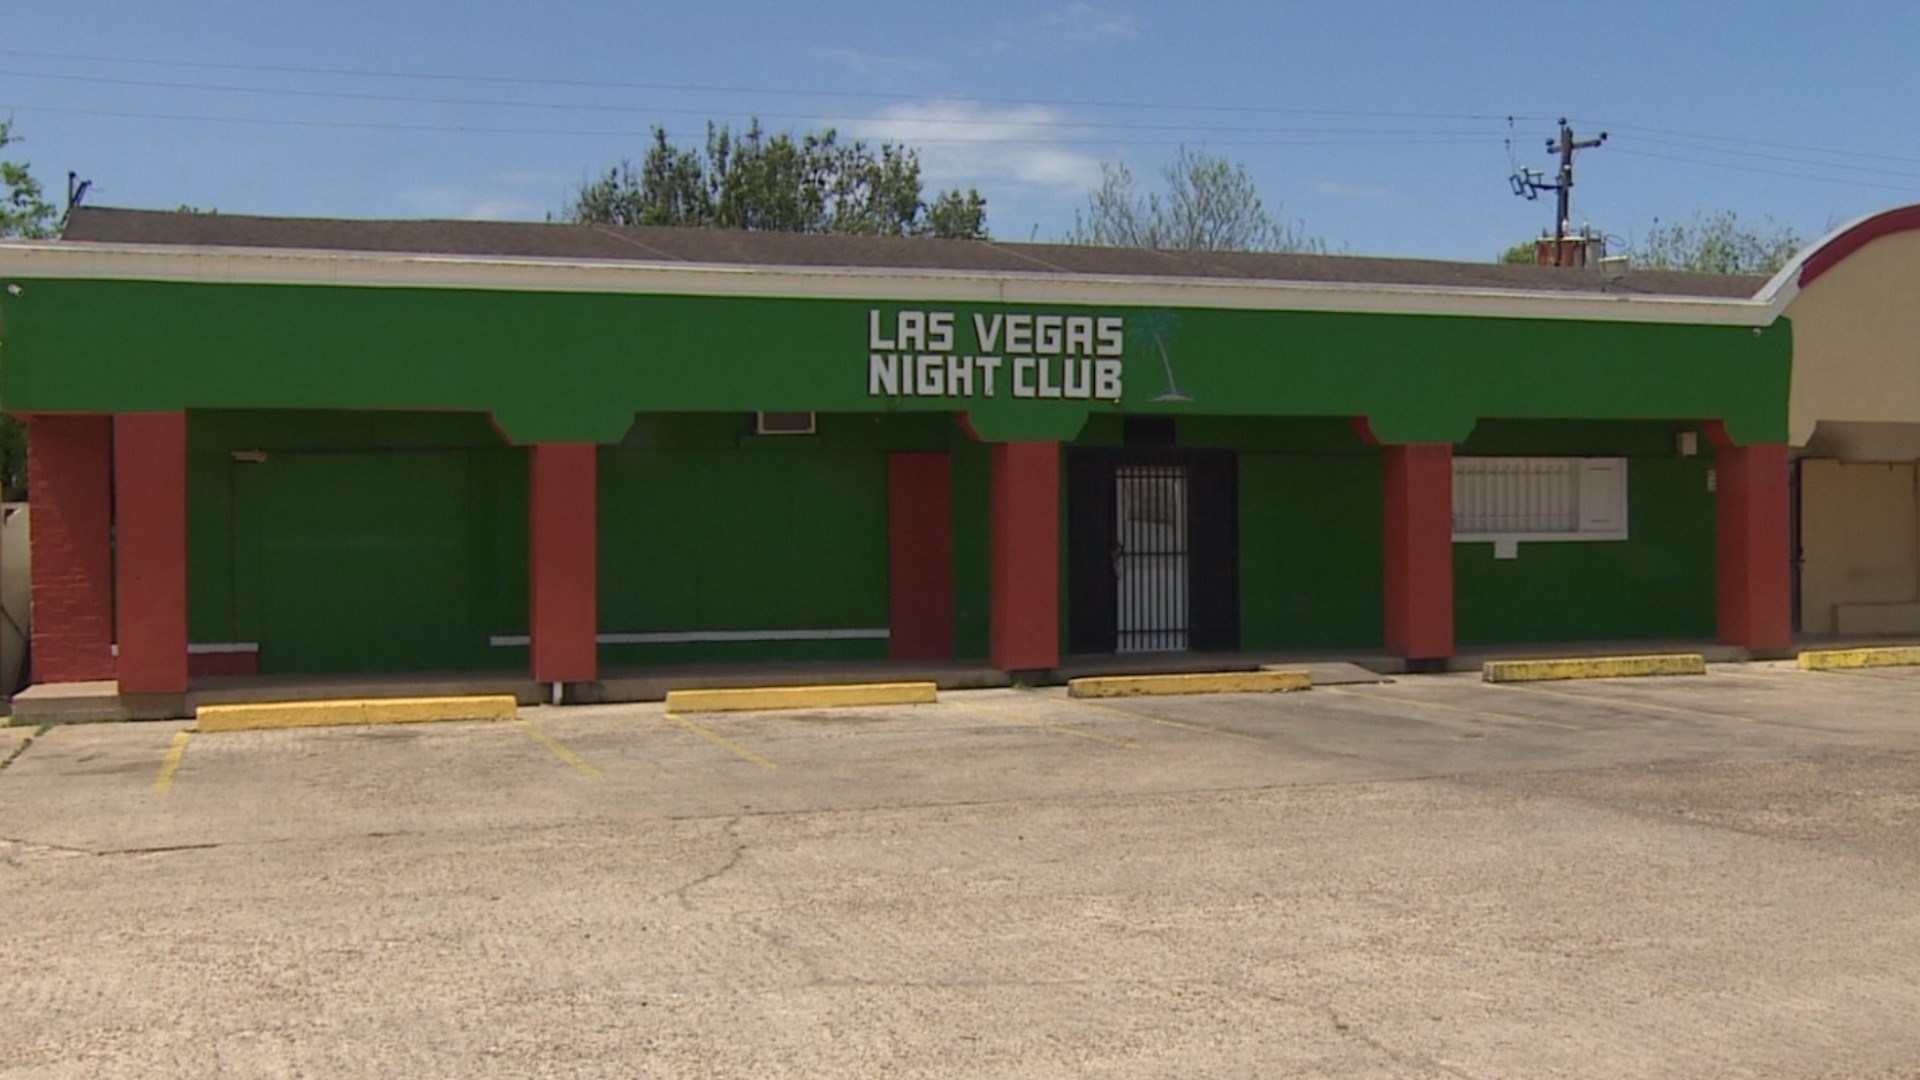 The investigation into the Vegas Nightclub on West Hardy began after multiple women working there claimed prostitution and human trafficking were happening.